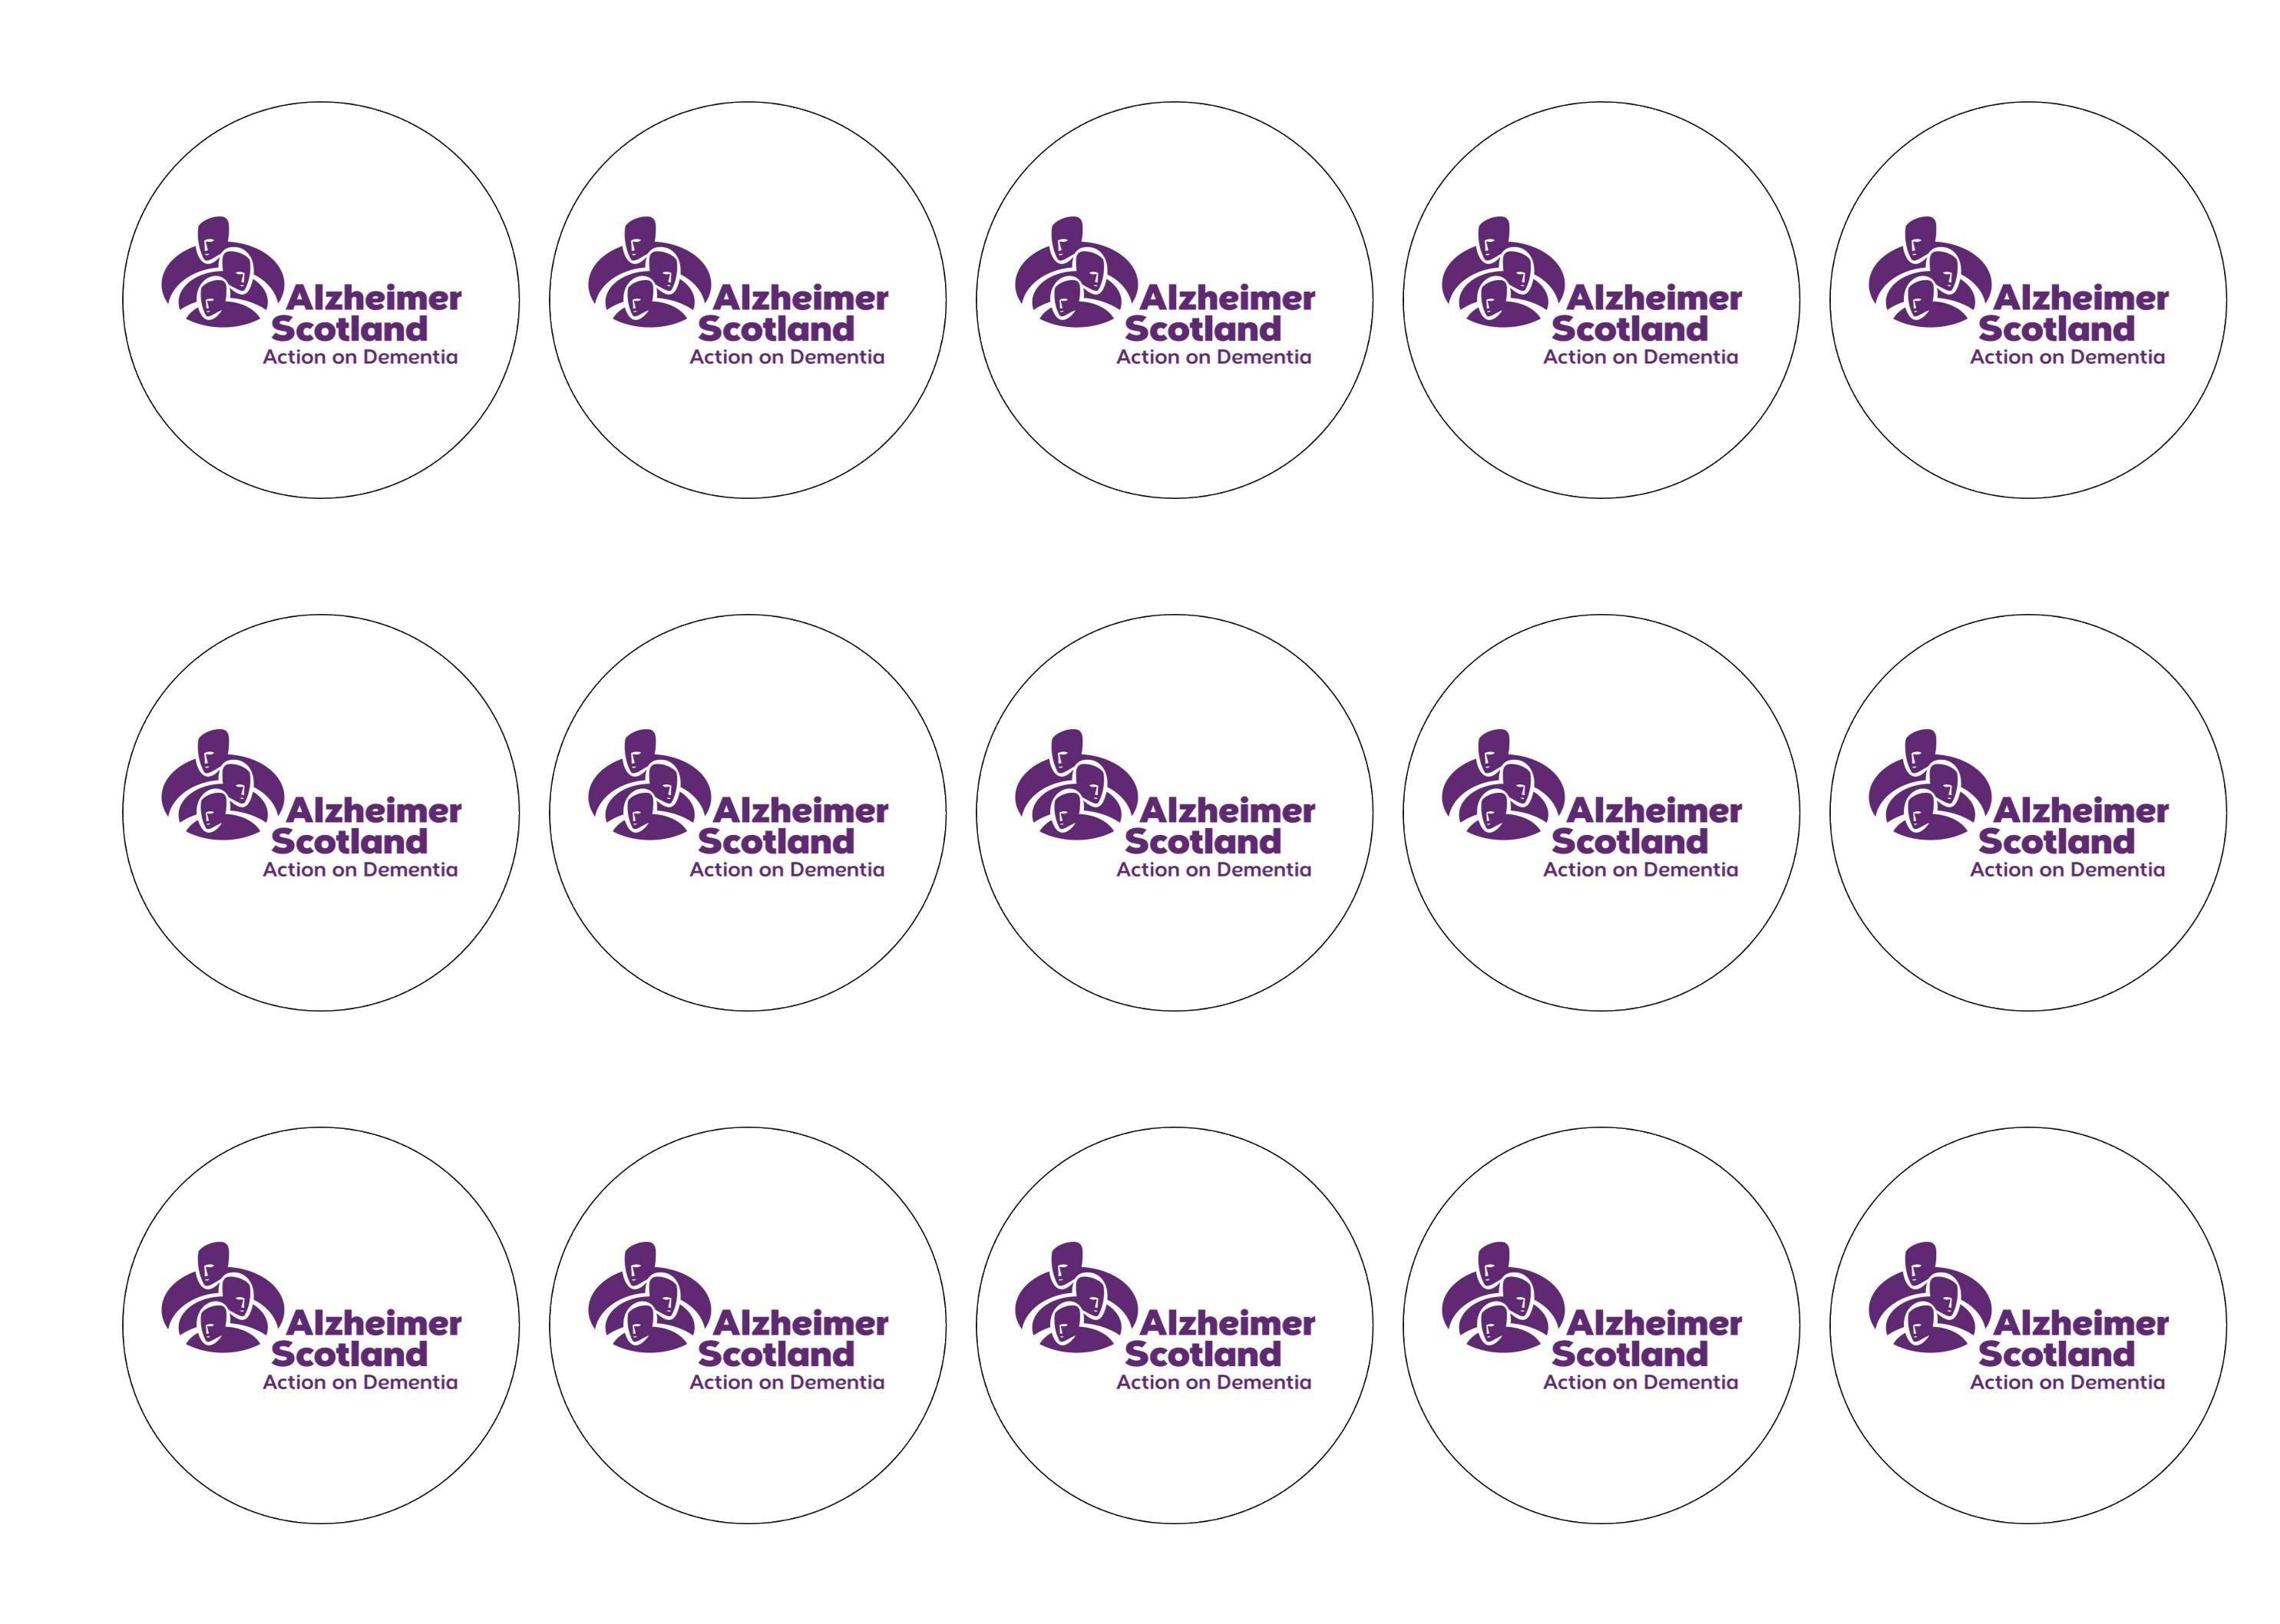 Printed edible cupcake toppers is support of Alzheimer Scotland